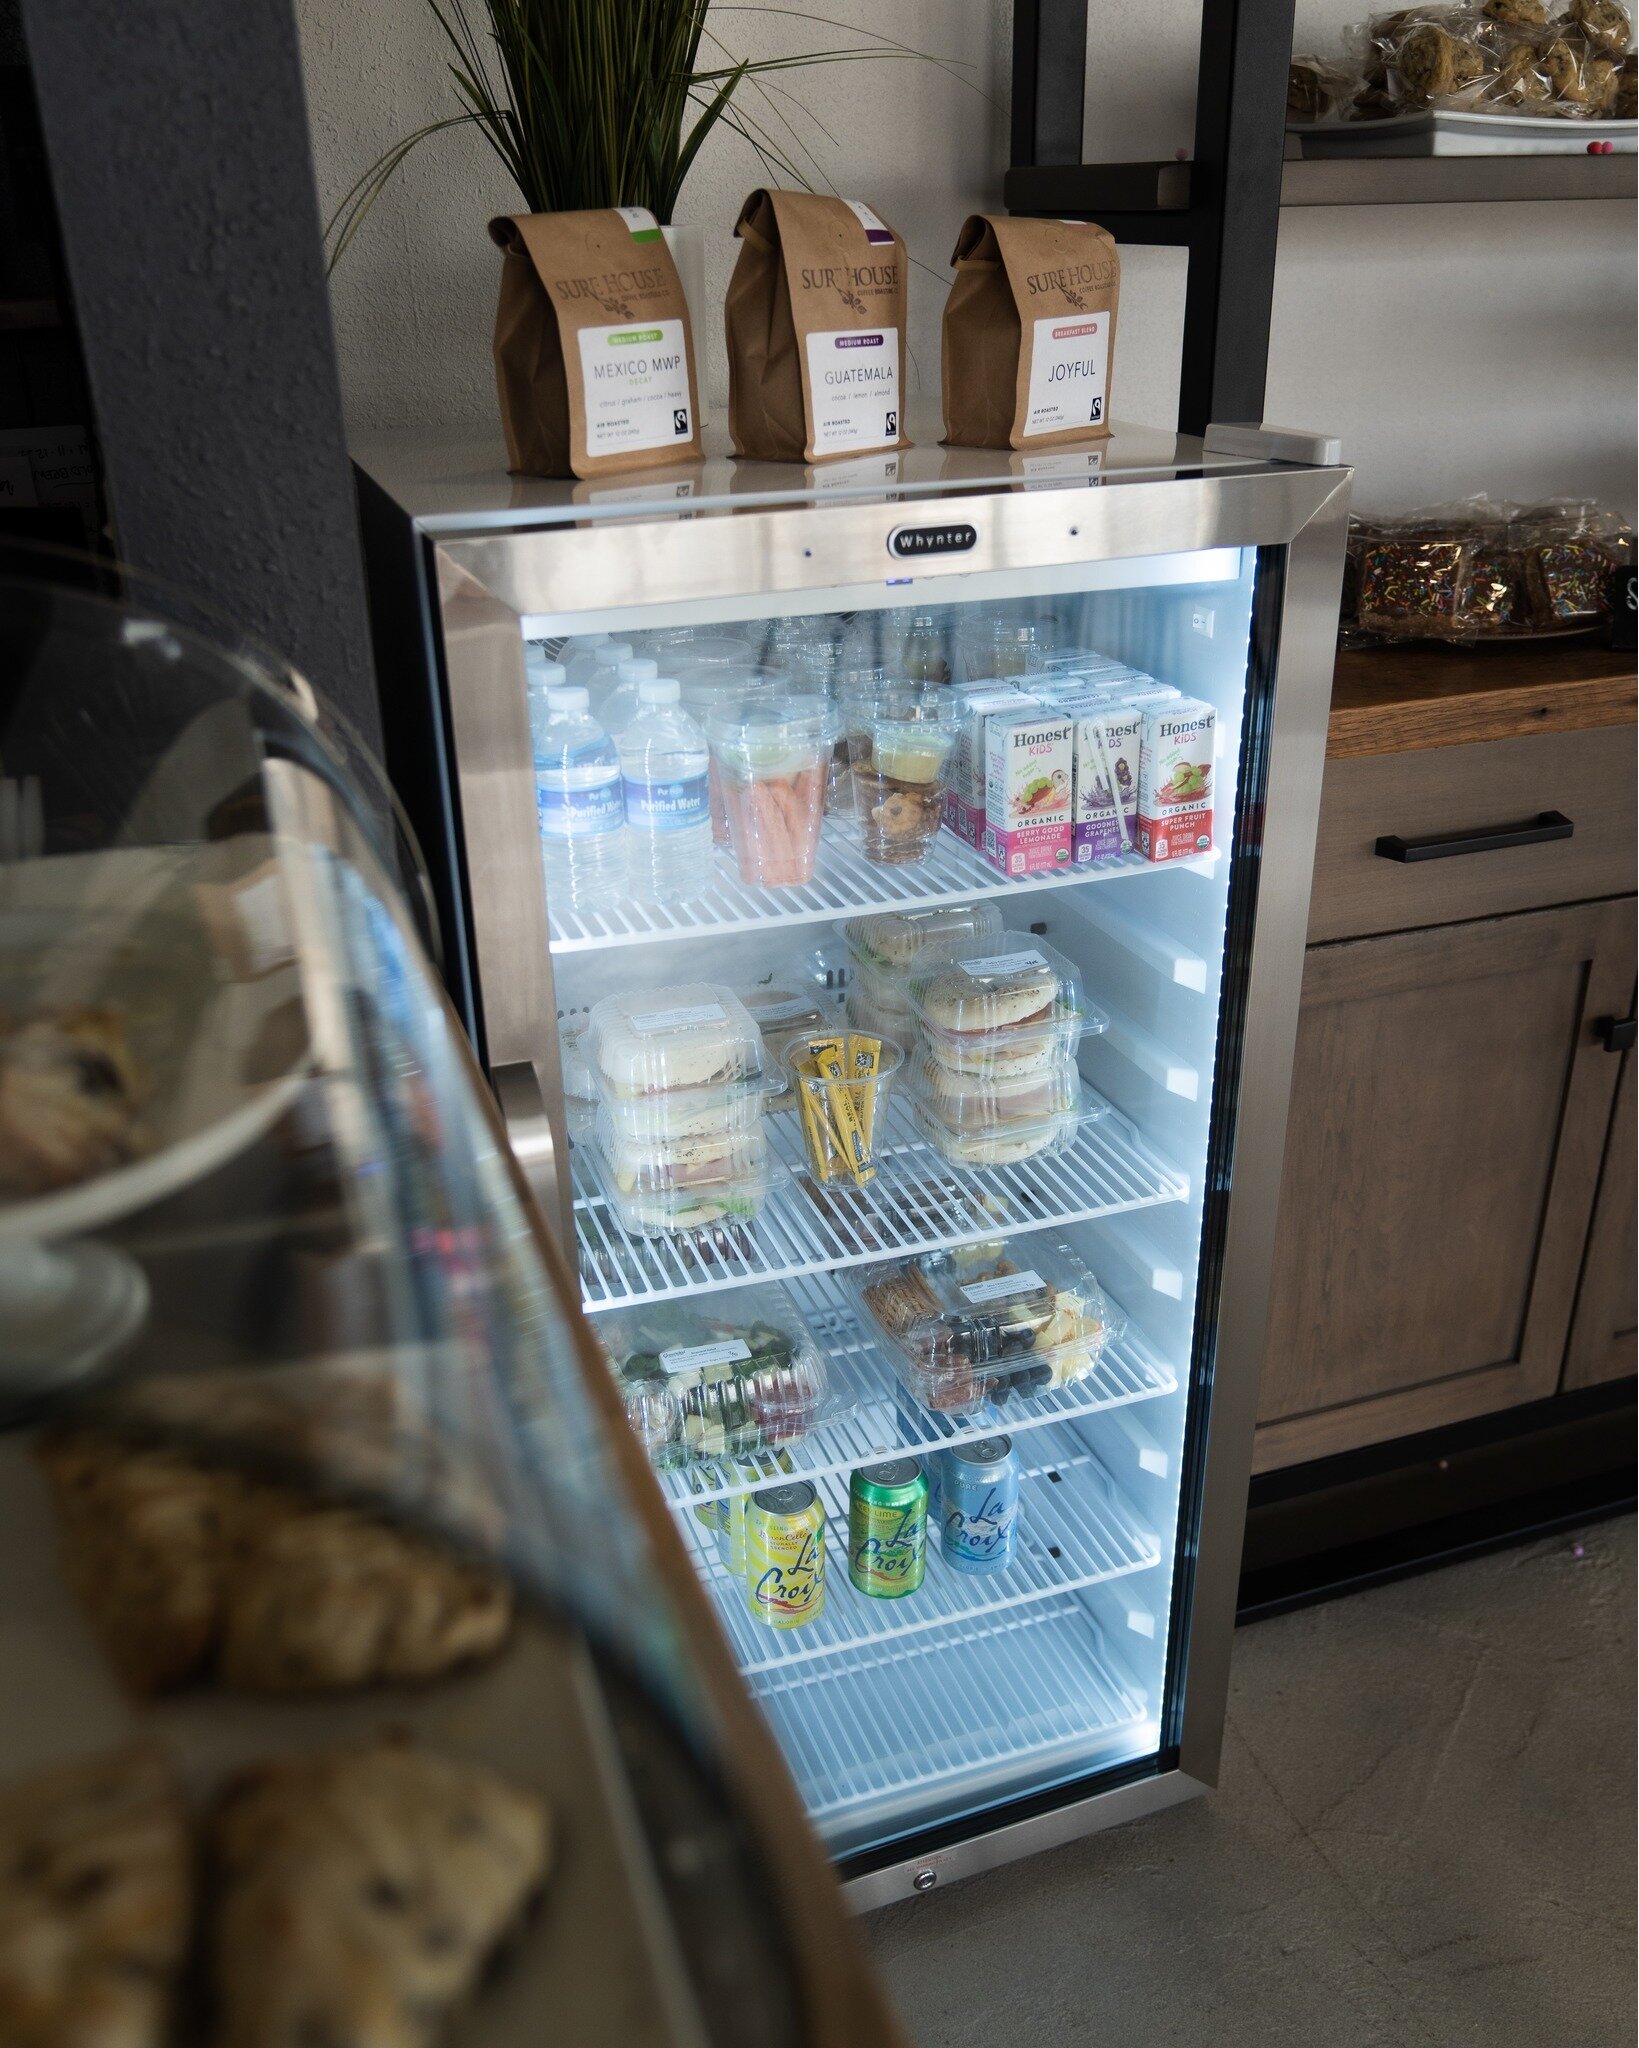 POV: you don't have time for @nickdcrook to make you a fluffy egg sandwich so you look at the scone options for the day and notice a new fridge that is fully stocked with everything you need to make it through your day! 

Turkey Havarti Bagel Sandwic